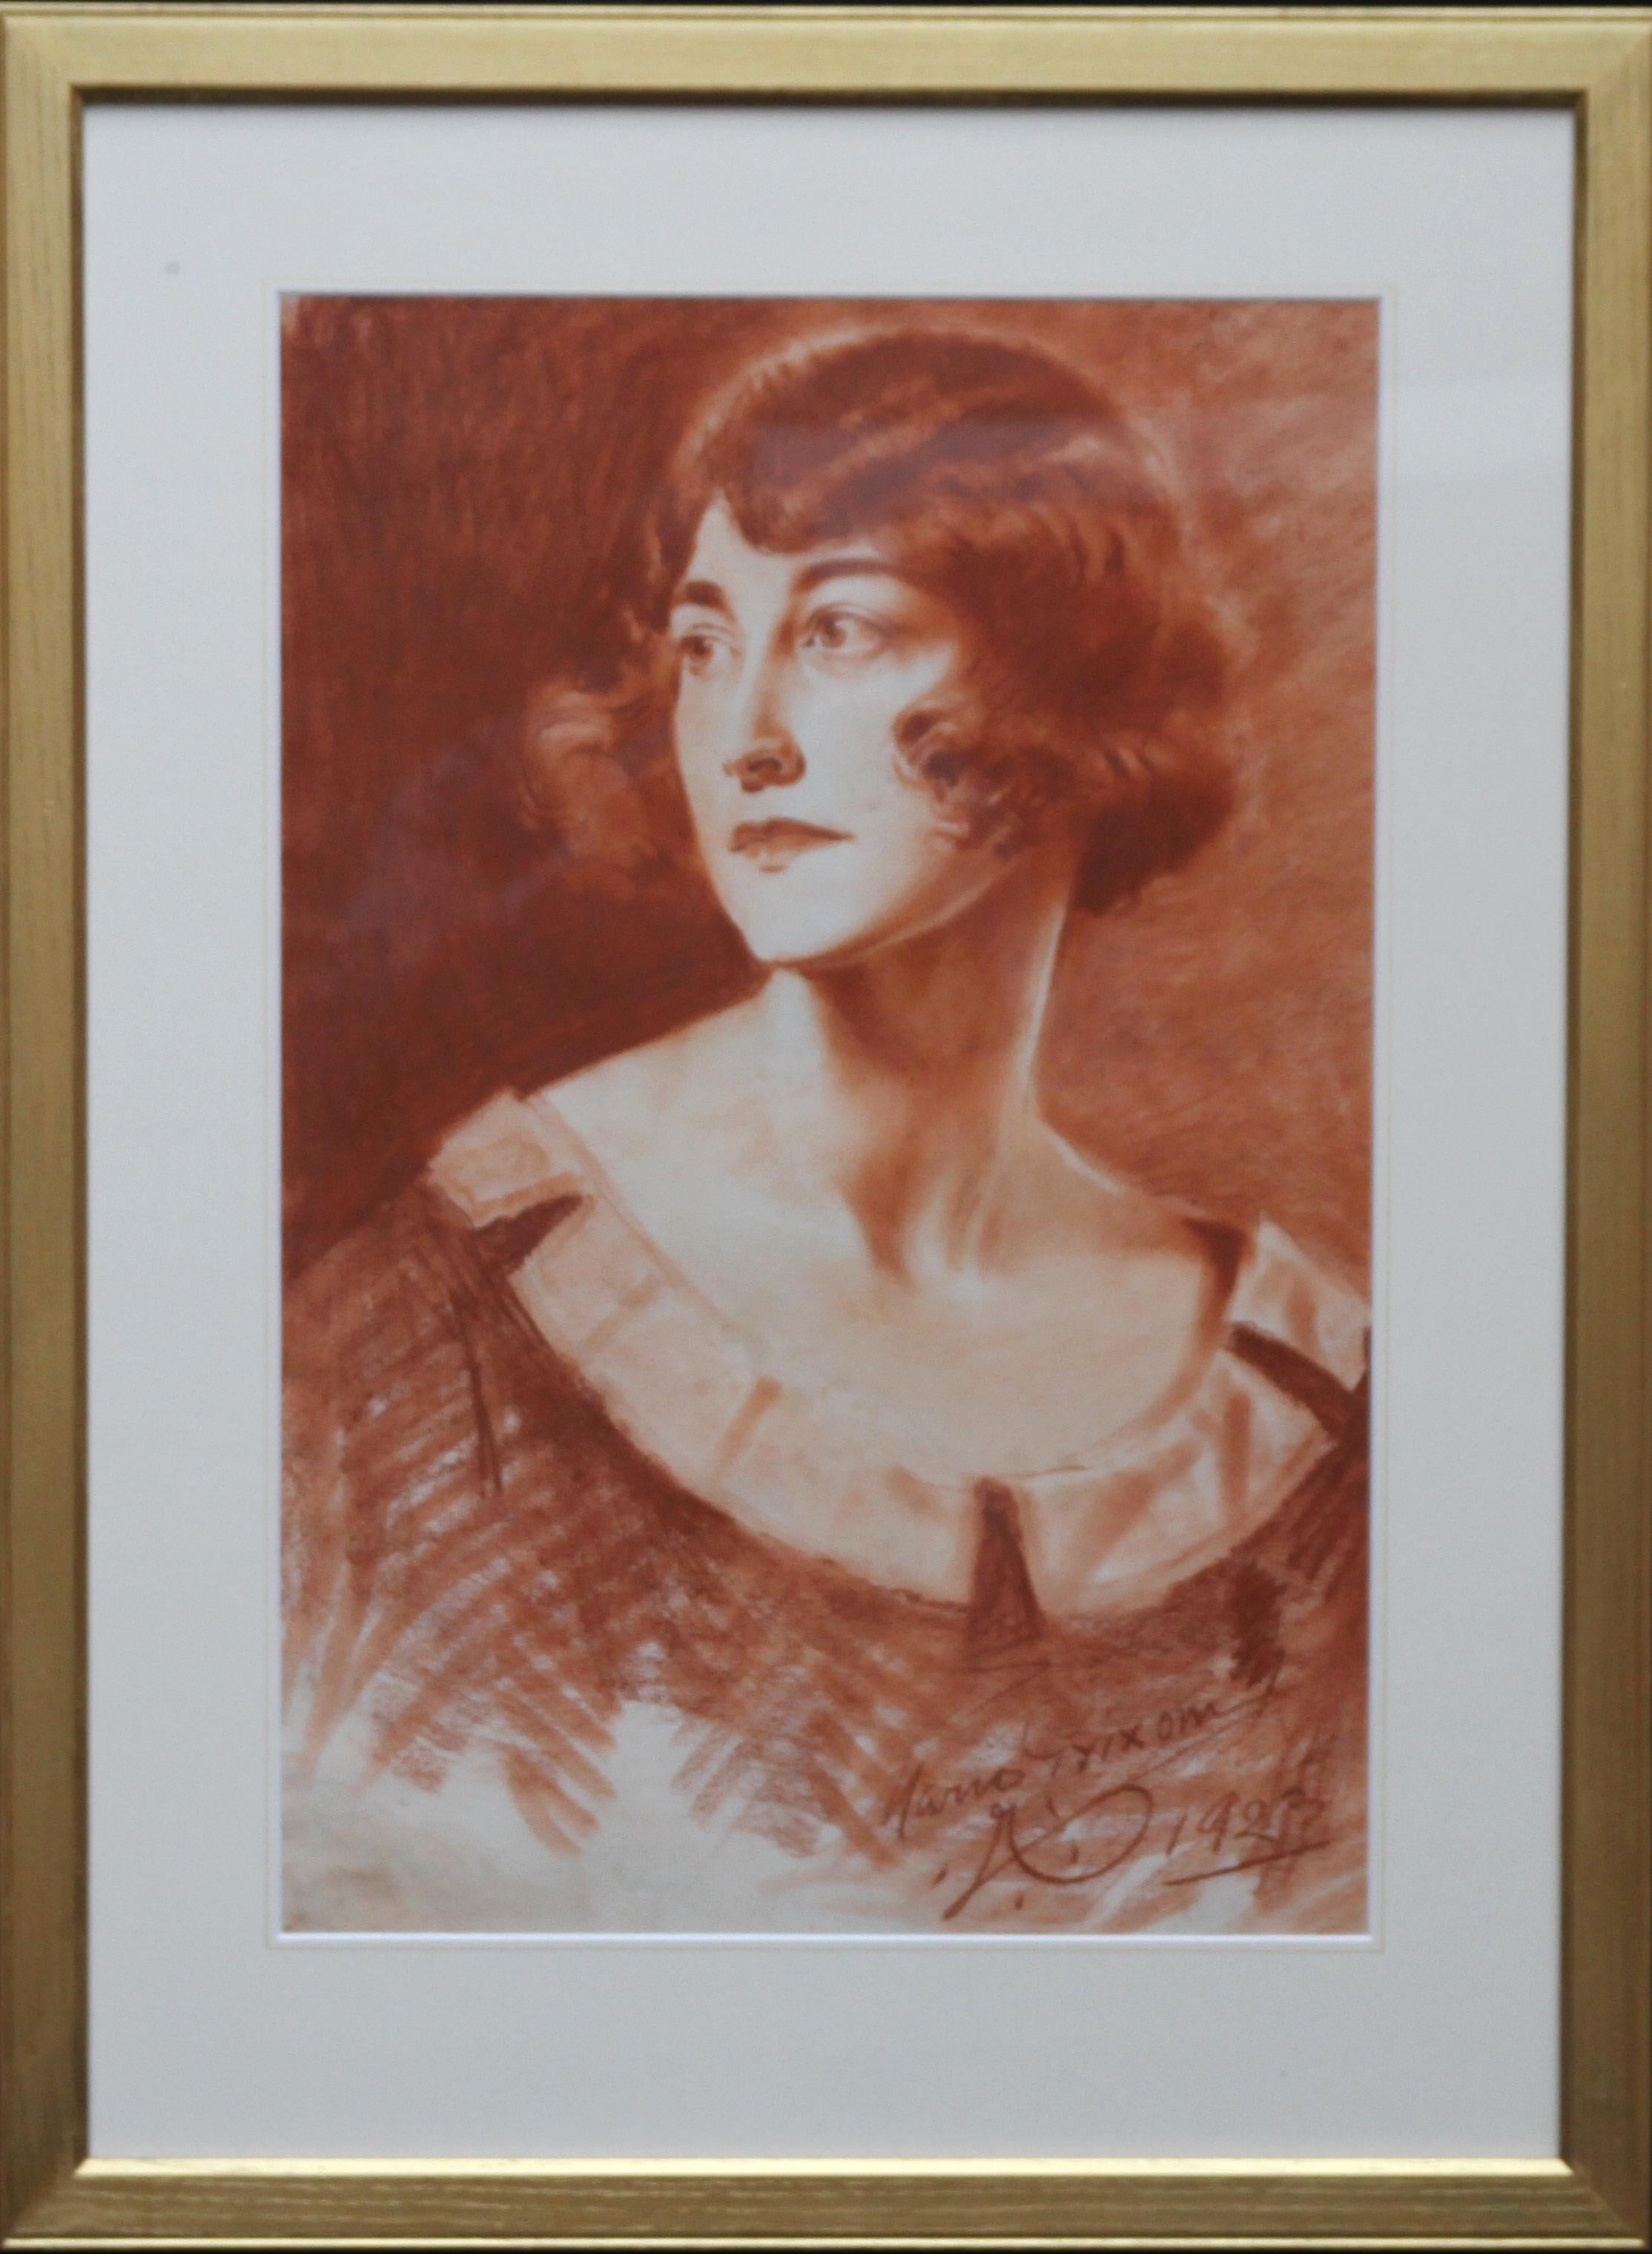 This is a very pretty sanguine chalk drawing on paper of a young woman dated 1923 by Count Mario Grixoni.  Executed by one of the leading artists of the day it is a very striking and fascinating portrait in an Art Deco style with beautiful delicate